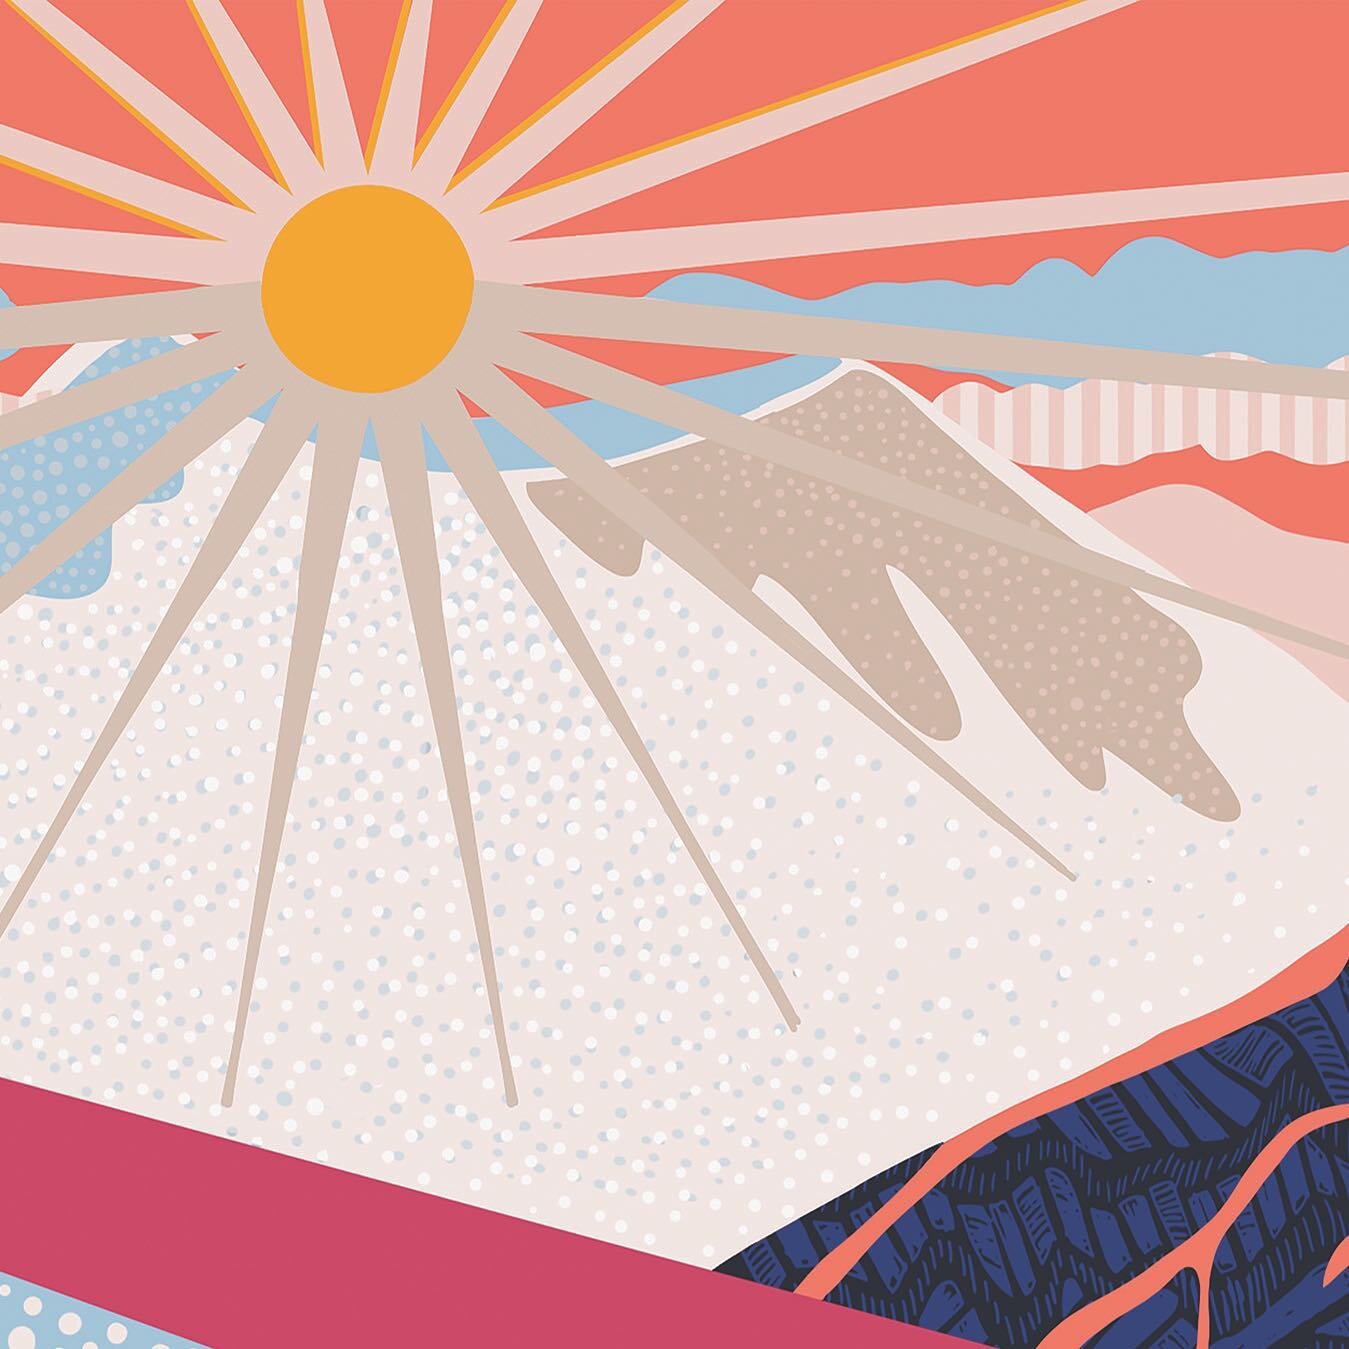 WALMART digital mural design: 11 of 12 
.
Walmart asked me to design a 50 foot wide mural for their Kailua-Kona store. I divided the long space into thirds: volcanoes, agriculture, and ocean.&nbsp;

The first third shows sunrise at Mauna Kea and an e